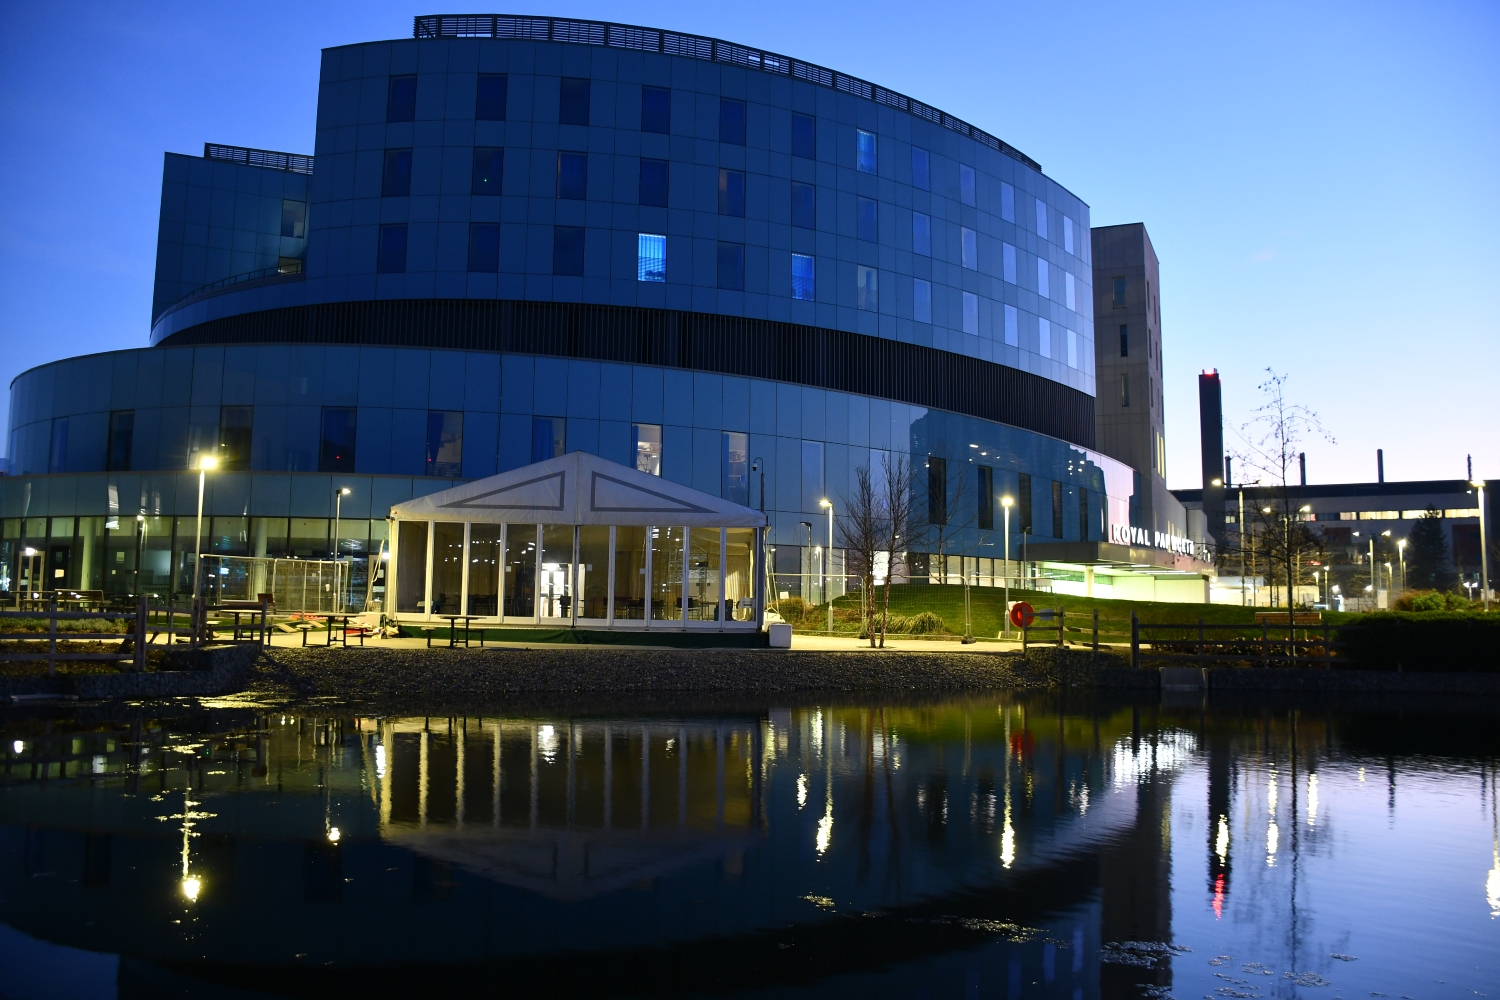 A blue oval shaped building, with a pond in the foreground, in early morning dusk. 